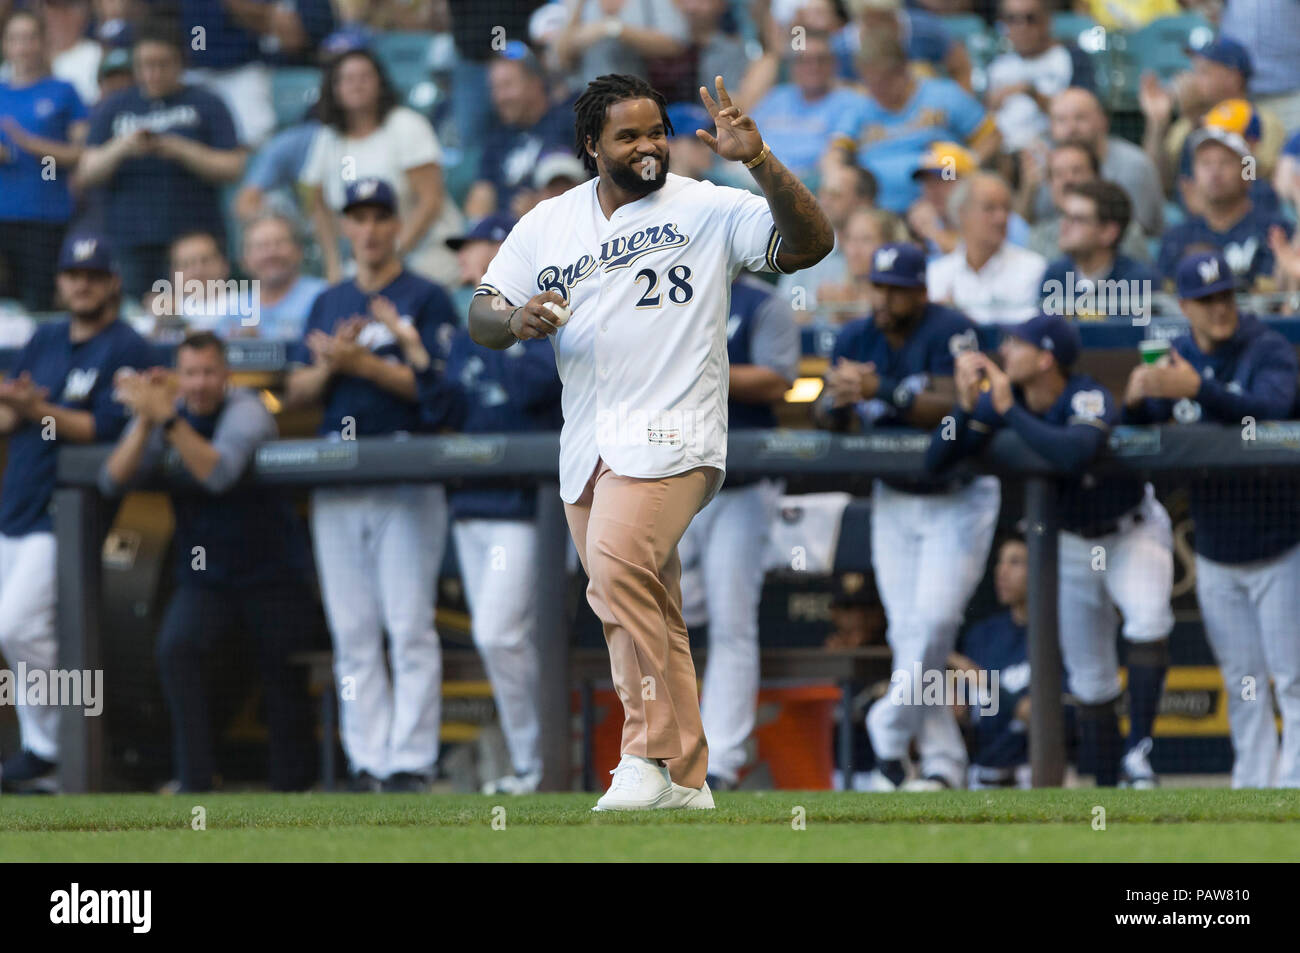 Milwaukee, WI, USA. 24th July, 2018. Prince Fielder is inducted into the Wall of Fame before the Major League Baseball game between the Milwaukee Brewers and the Washington Nationals at Miller Park in Milwaukee, WI. John Fisher/CSM/Alamy Live News Stock Photo